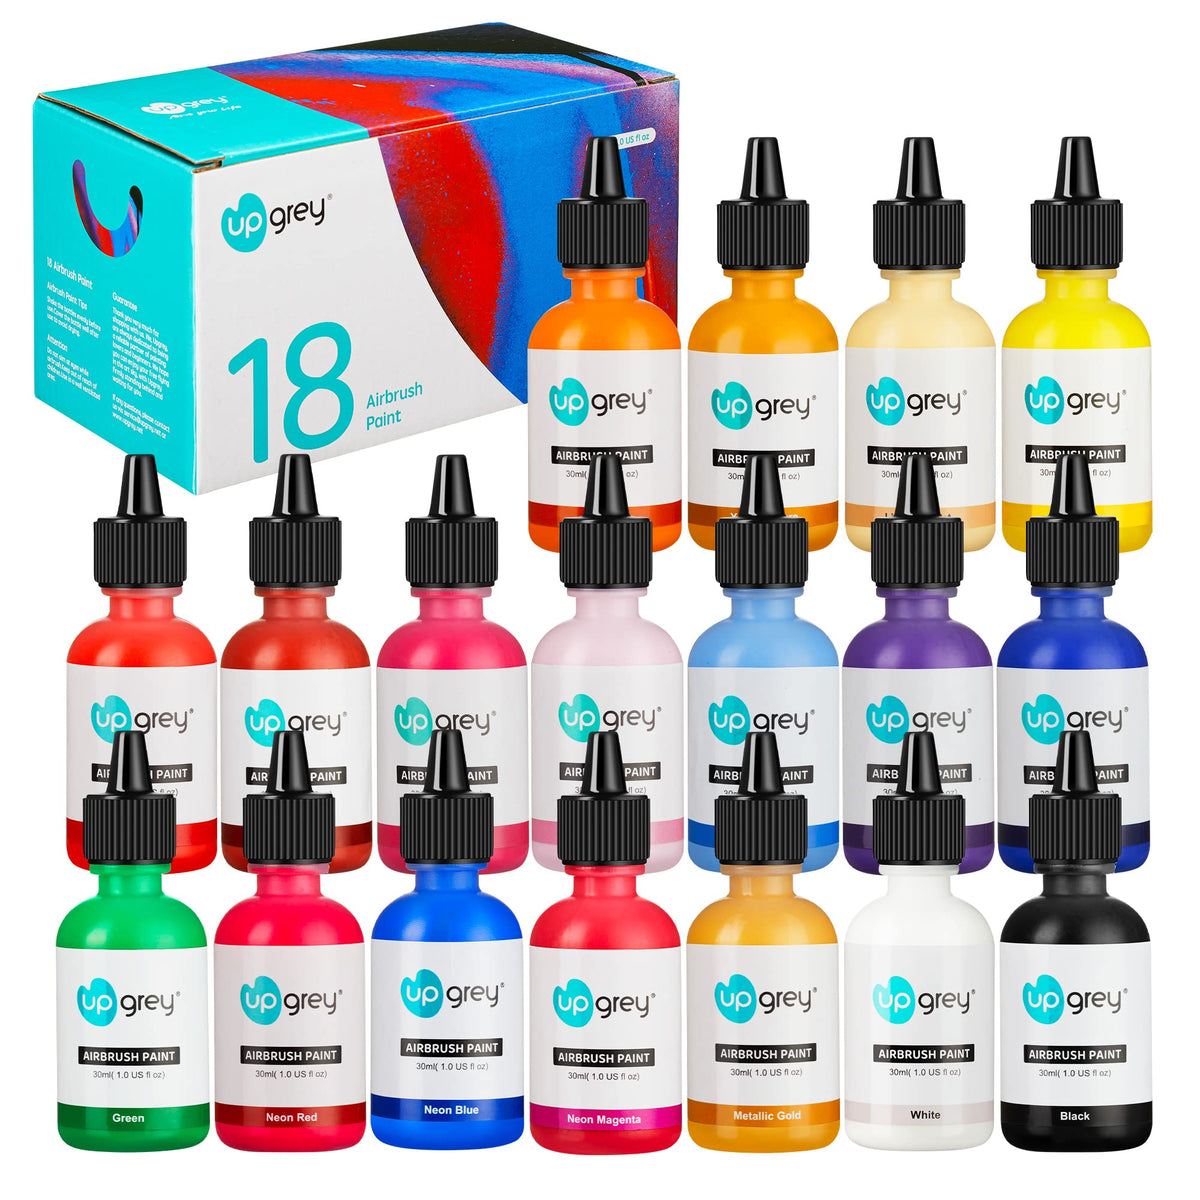  Magicfly Airbrush Paint, 16 Colors Acrylic Airbrush